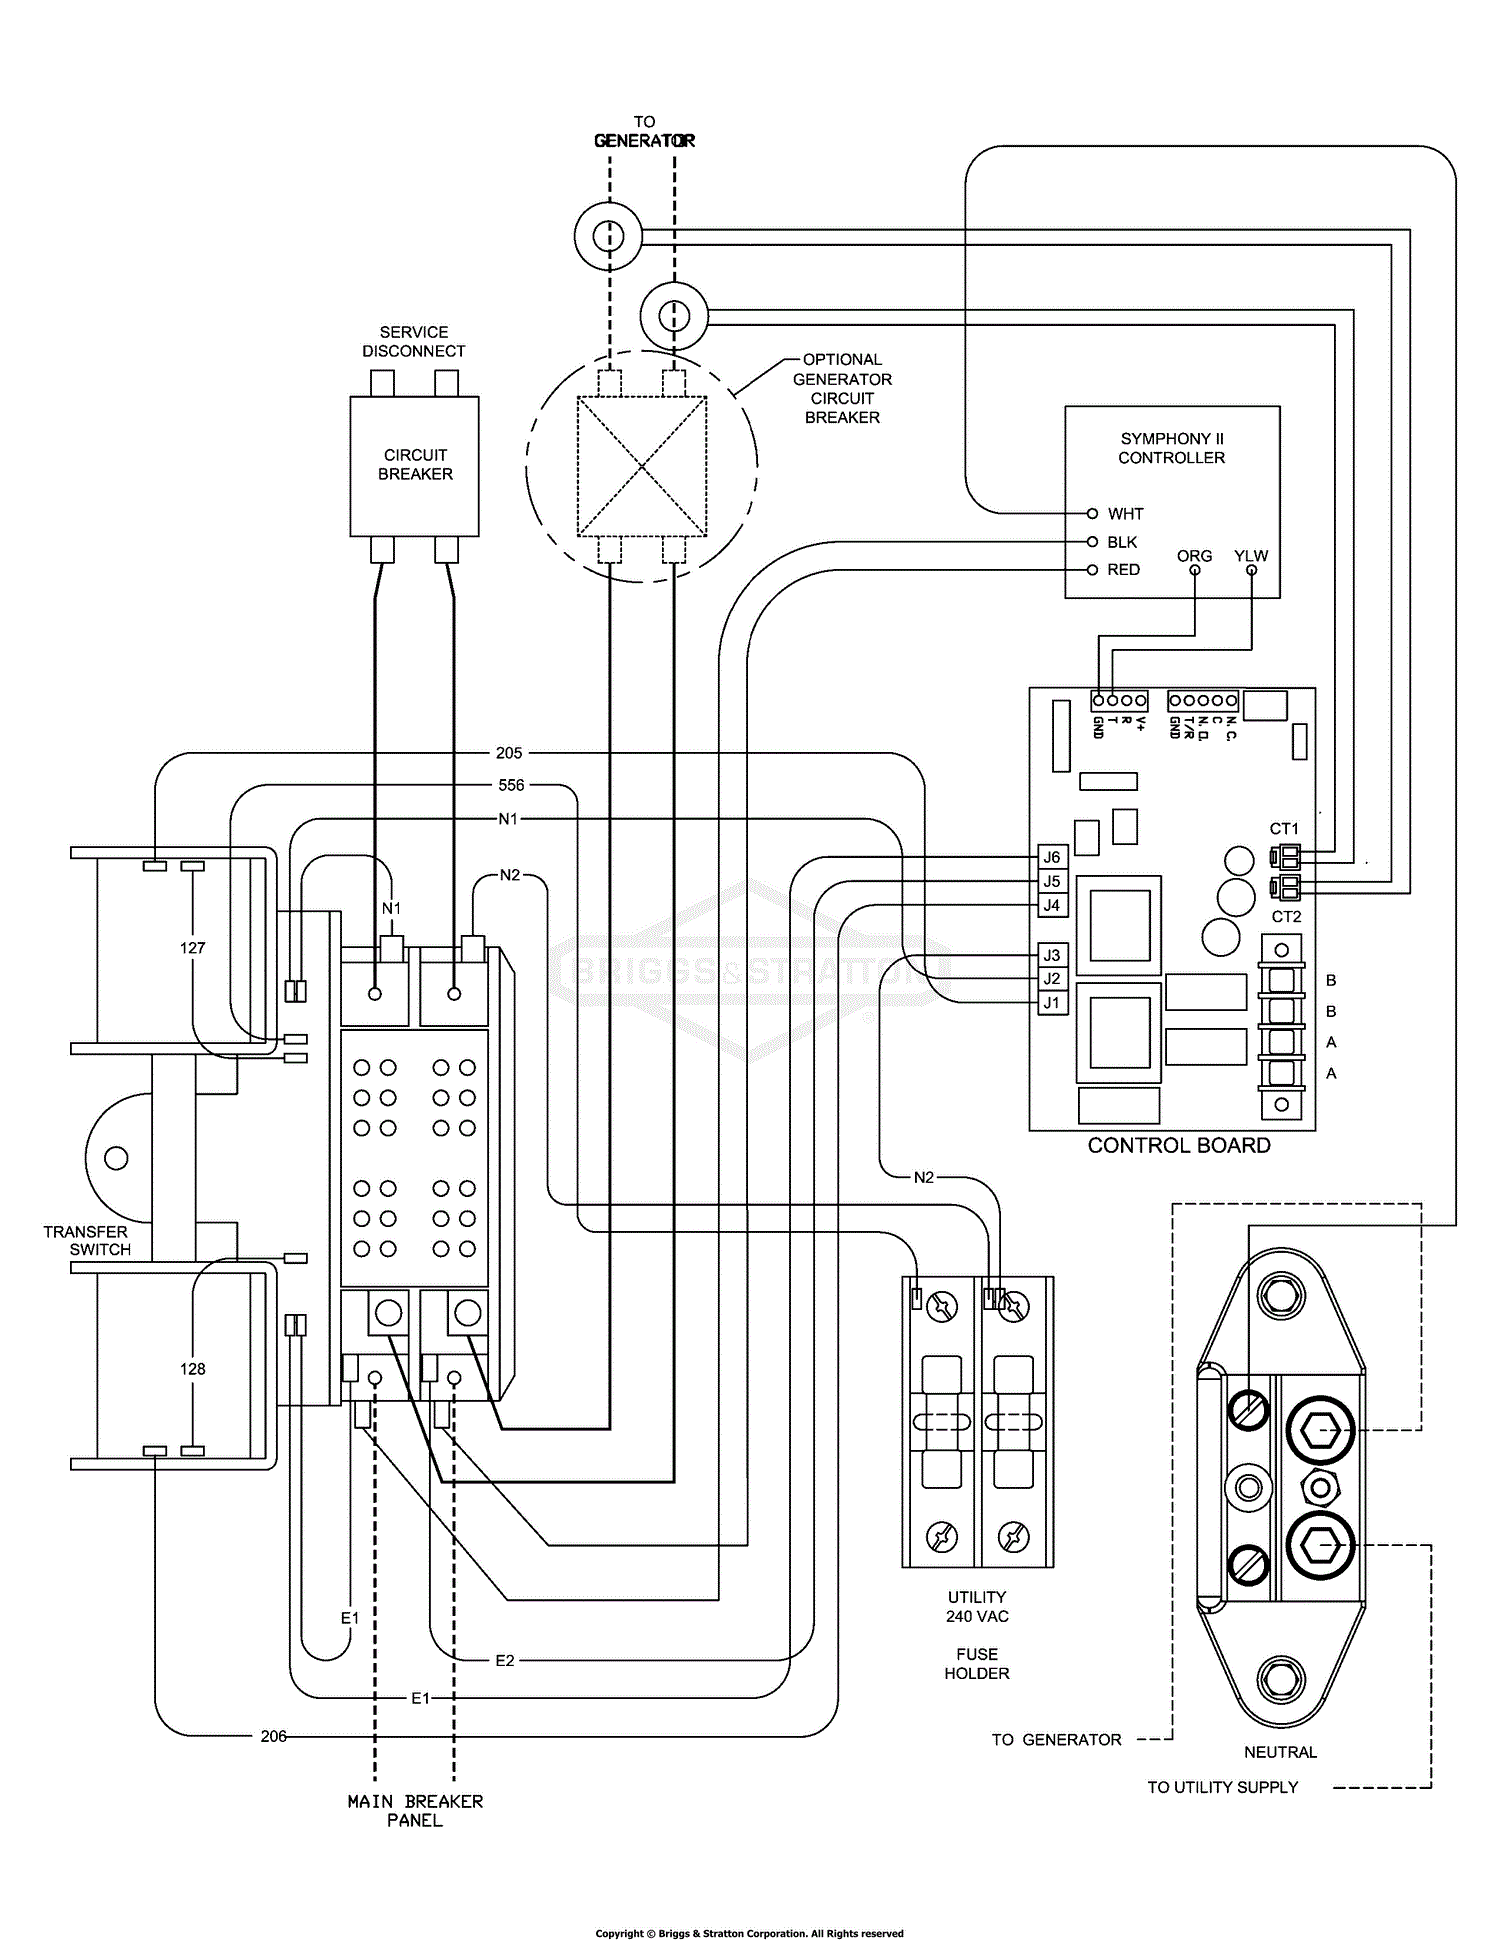 Generac Automatic Transfer Switch Wiring Diagram - Collection - Wiring